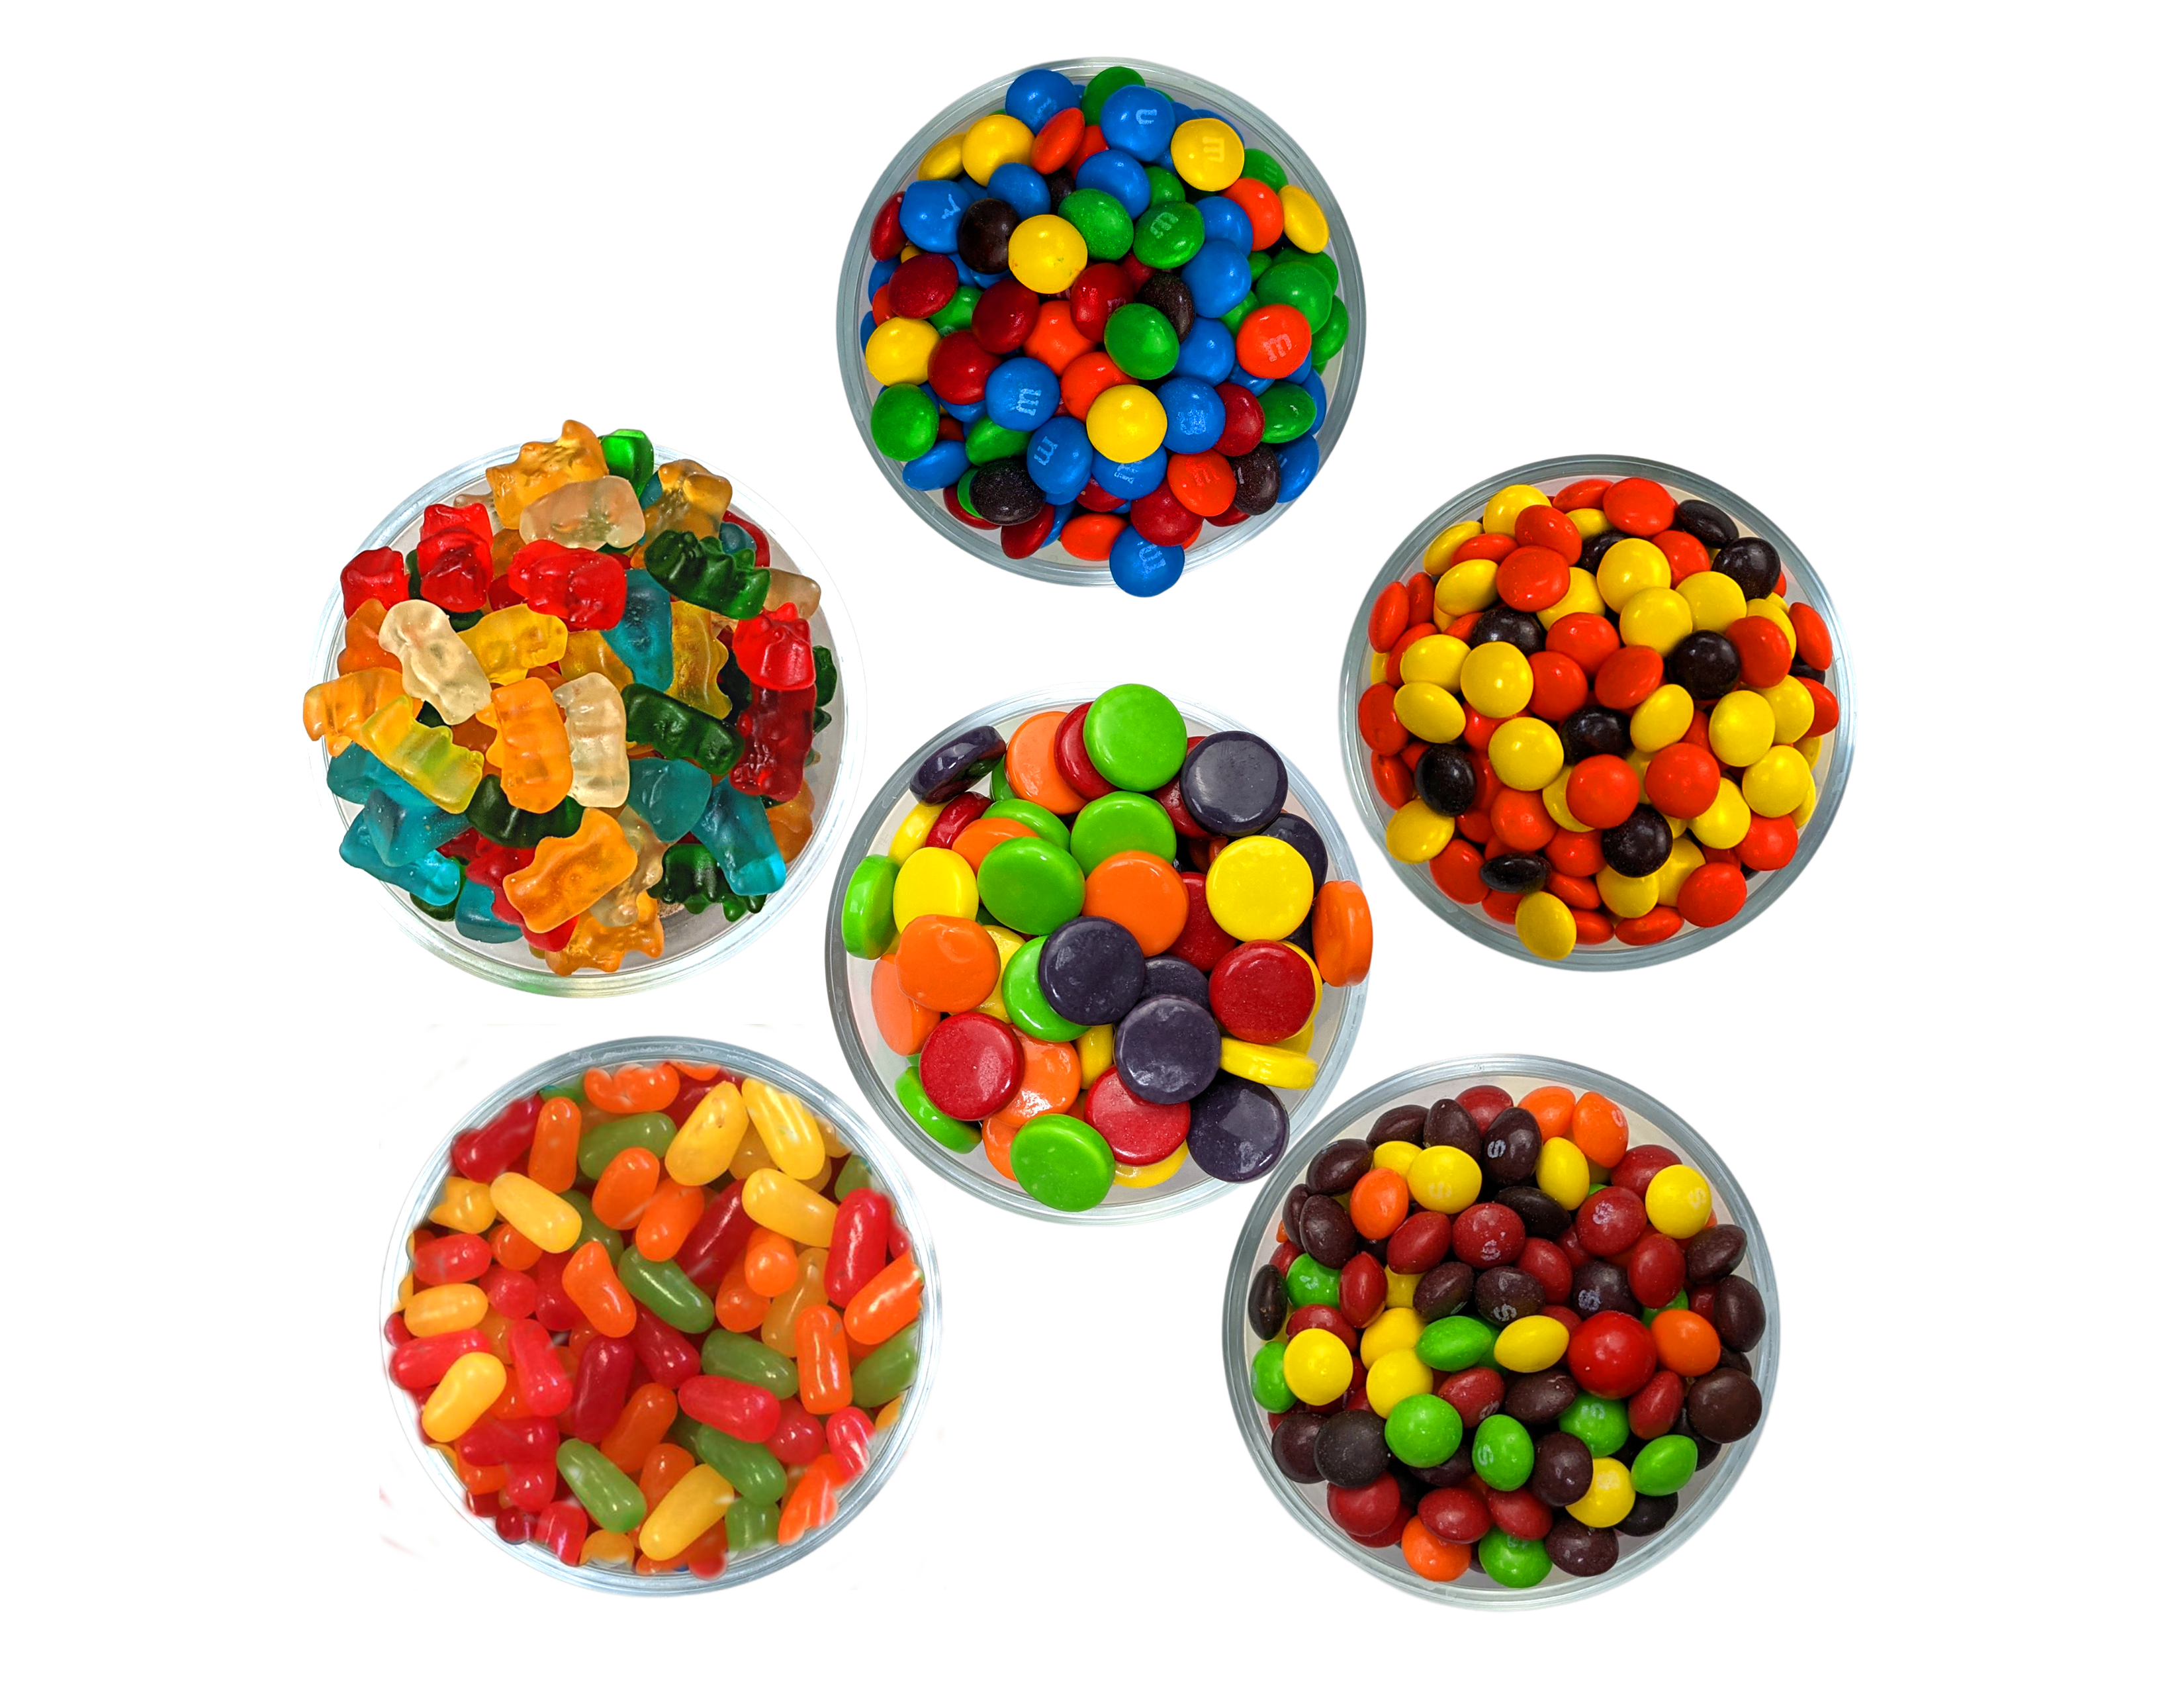 corporate gifting | candy gifts | candy gift box | branded gift box | logo gifts | Plain M&Ms | Reese's Pieces | Skittles | Spree | Mike & lkes | Gummy Bears.